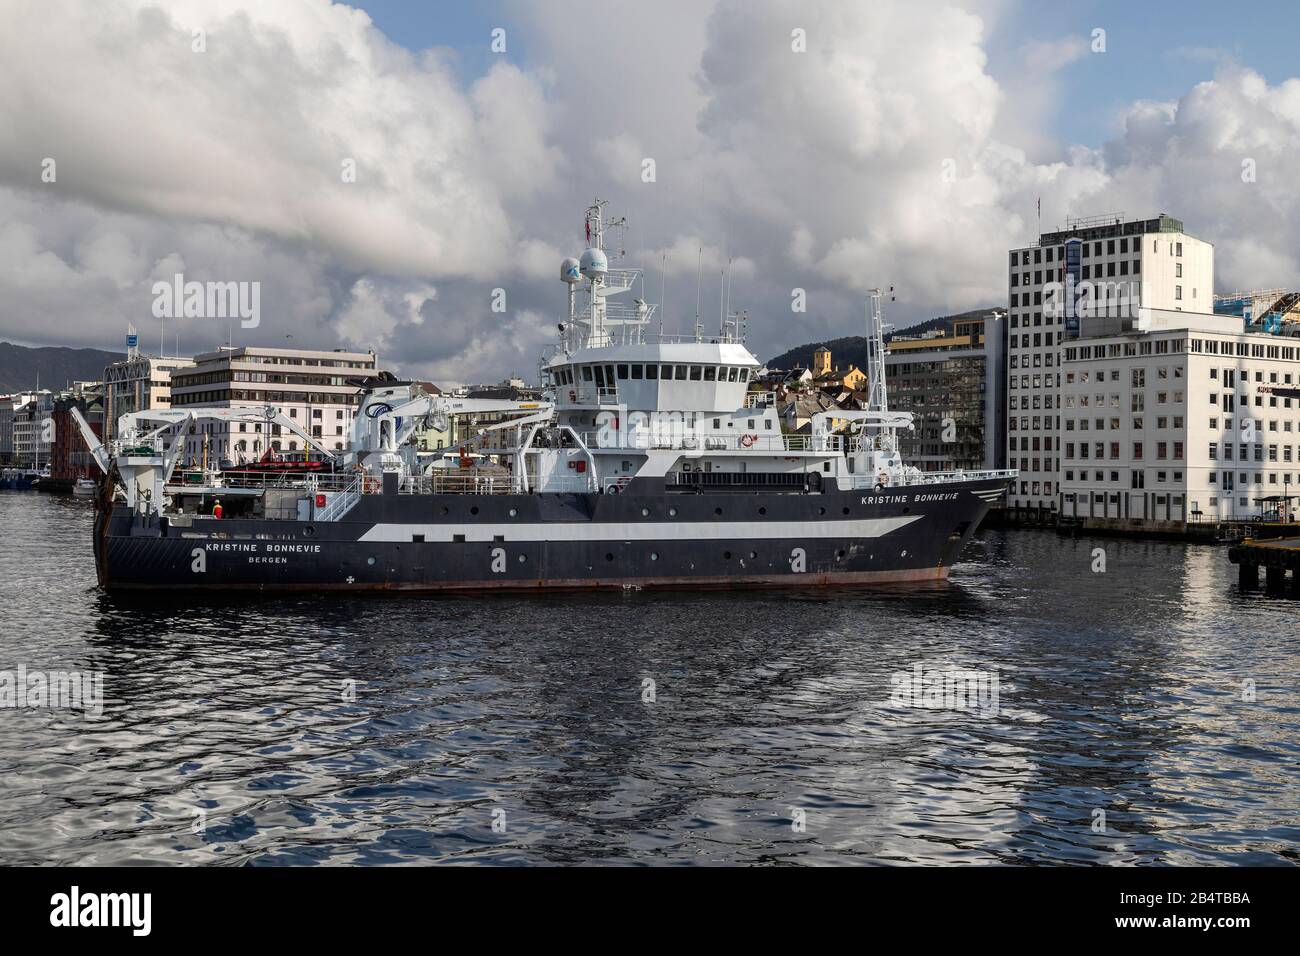 Ocean research vessel Kristine Bonnevie departing from the port of Bergen, Norway. Owned by the University of Bergen, Institute of Marine Research. Stock Photo